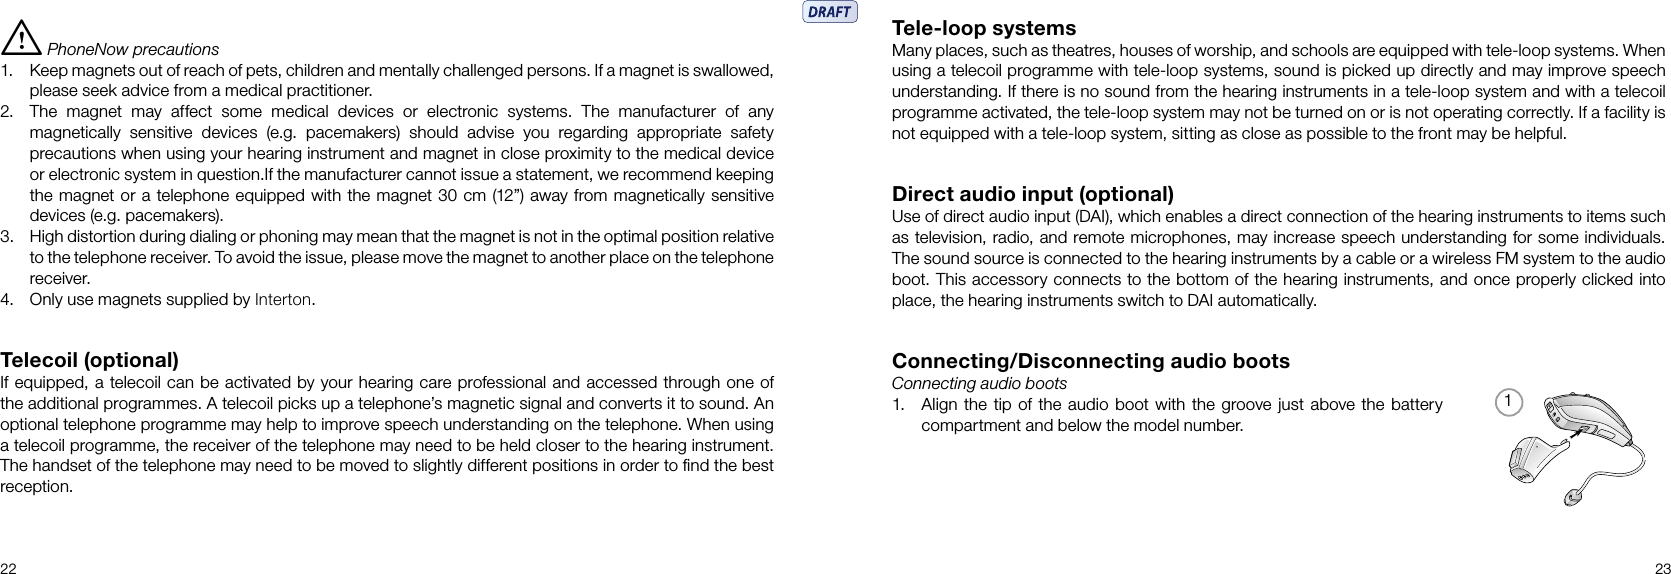 122 23Tele-loop systemsMany places, such as theatres, houses of worship, and schools are equipped with tele-loop systems. When using a telecoil programme with tele-loop systems, sound is picked up directly and may improve speech understanding. If there is no sound from the hearing instruments in a tele-loop system and with a telecoil programme activated, the tele-loop system may not be turned on or is not operating correctly. If a facility is not equipped with a tele-loop system, sitting as close as possible to the front may be helpful.Direct audio input (optional)Use of direct audio input (DAI), which enables a direct connection of the hearing instruments to items such as television, radio, and remote microphones, may increase speech understanding for some individuals. The sound source is connected to the hearing instruments by a cable or a wireless FM system to the audio boot. This accessory connects to the bottom of the hearing instruments, and once properly clicked into place, the hearing instruments switch to DAI automatically.Connecting/Disconnecting audio bootsConnecting audio boots1.  Align  the tip  of the audio boot with the groove just above the battery compartment and below the model number.i PhoneNow precautions1.  Keep magnets out of reach of pets, children and mentally challenged persons. If a magnet is swallowed, please seek advice from a medical practitioner.2. The  magnet  may  affect  some  medical  devices  or  electronic  systems.  The  manufacturer  of  any magnetically  sensitive  devices  (e.g.  pacemakers)  should  advise  you  regarding  appropriate  safety precautions when using your hearing instrument and magnet in close proximity to the medical device or electronic system in question.If the manufacturer cannot issue a statement, we recommend keeping the magnet or a telephone equipped with the magnet 30 cm (12”) away from magnetically sensitive devices (e.g. pacemakers).3. High distortion during dialing or phoning may mean that the magnet is not in the optimal position relative to the telephone receiver. To avoid the issue, please move the magnet to another place on the telephone receiver.4. Only use magnets supplied by Interton.Telecoil (optional)If equipped, a telecoil can be activated by your hearing care professional and accessed through one of the additional programmes. A telecoil picks up a telephone’s magnetic signal and converts it to sound. An optional telephone programme may help to improve speech understanding on the telephone. When using a telecoil programme, the receiver of the telephone may need to be held closer to the hearing instrument. The handset of the telephone may need to be moved to slightly different positions in order to ﬁnd the best reception.